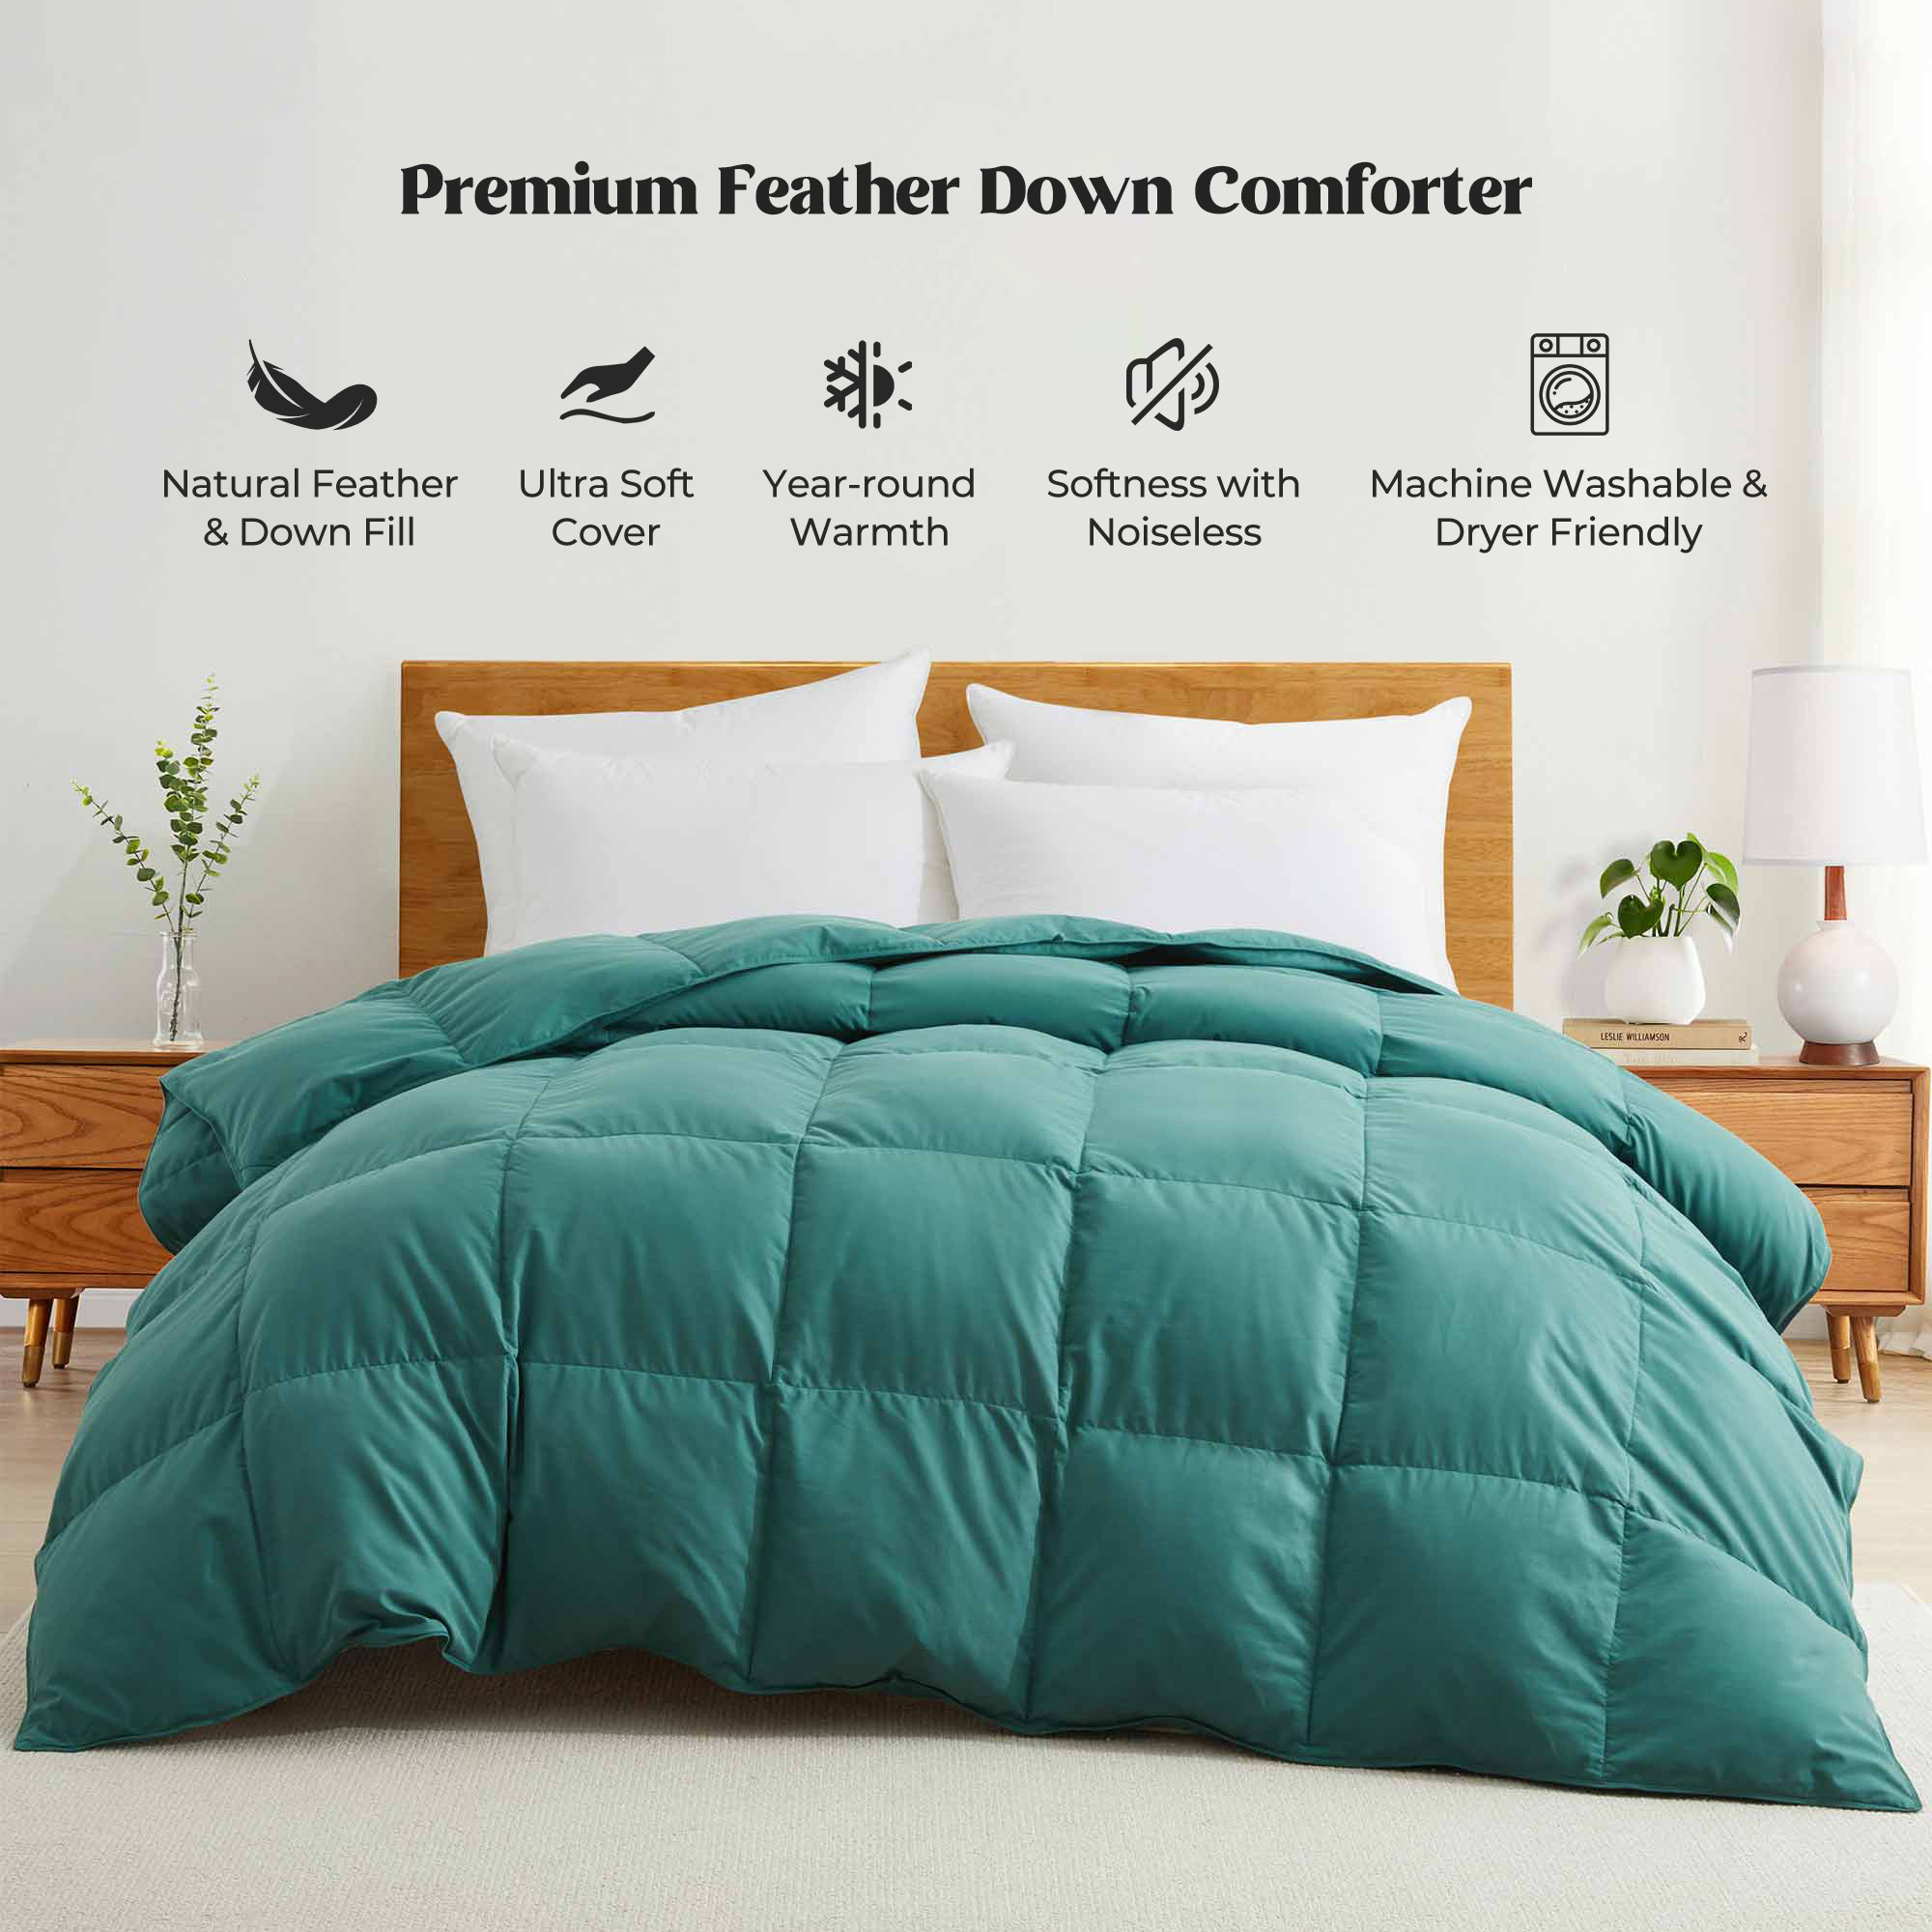 All Seasons Goose Down Feather Comforter Ultra Soft Comforter With Peach Skin Fabric - Laurel Green, Twin-68*88